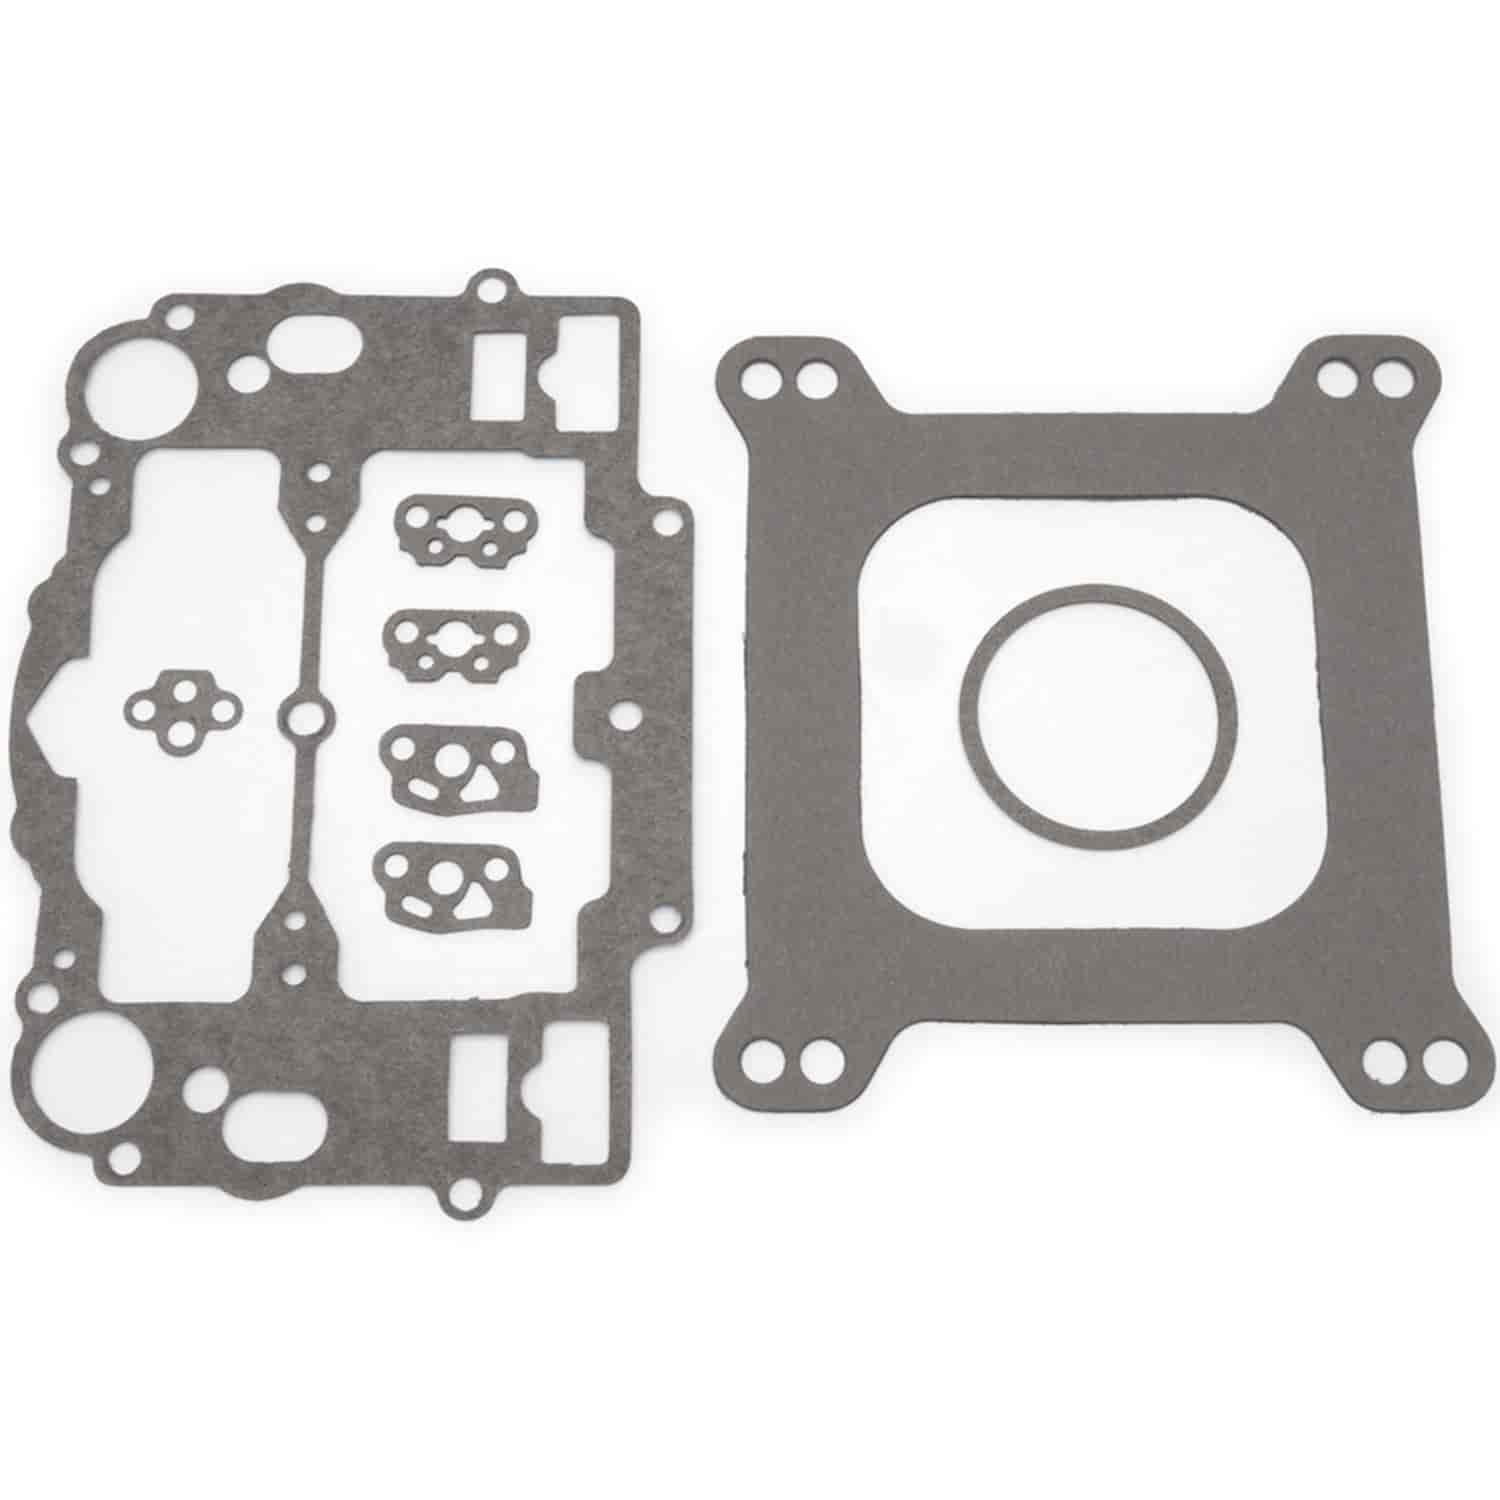 Gasket Set Fits Performer and Thunder Series Carbs